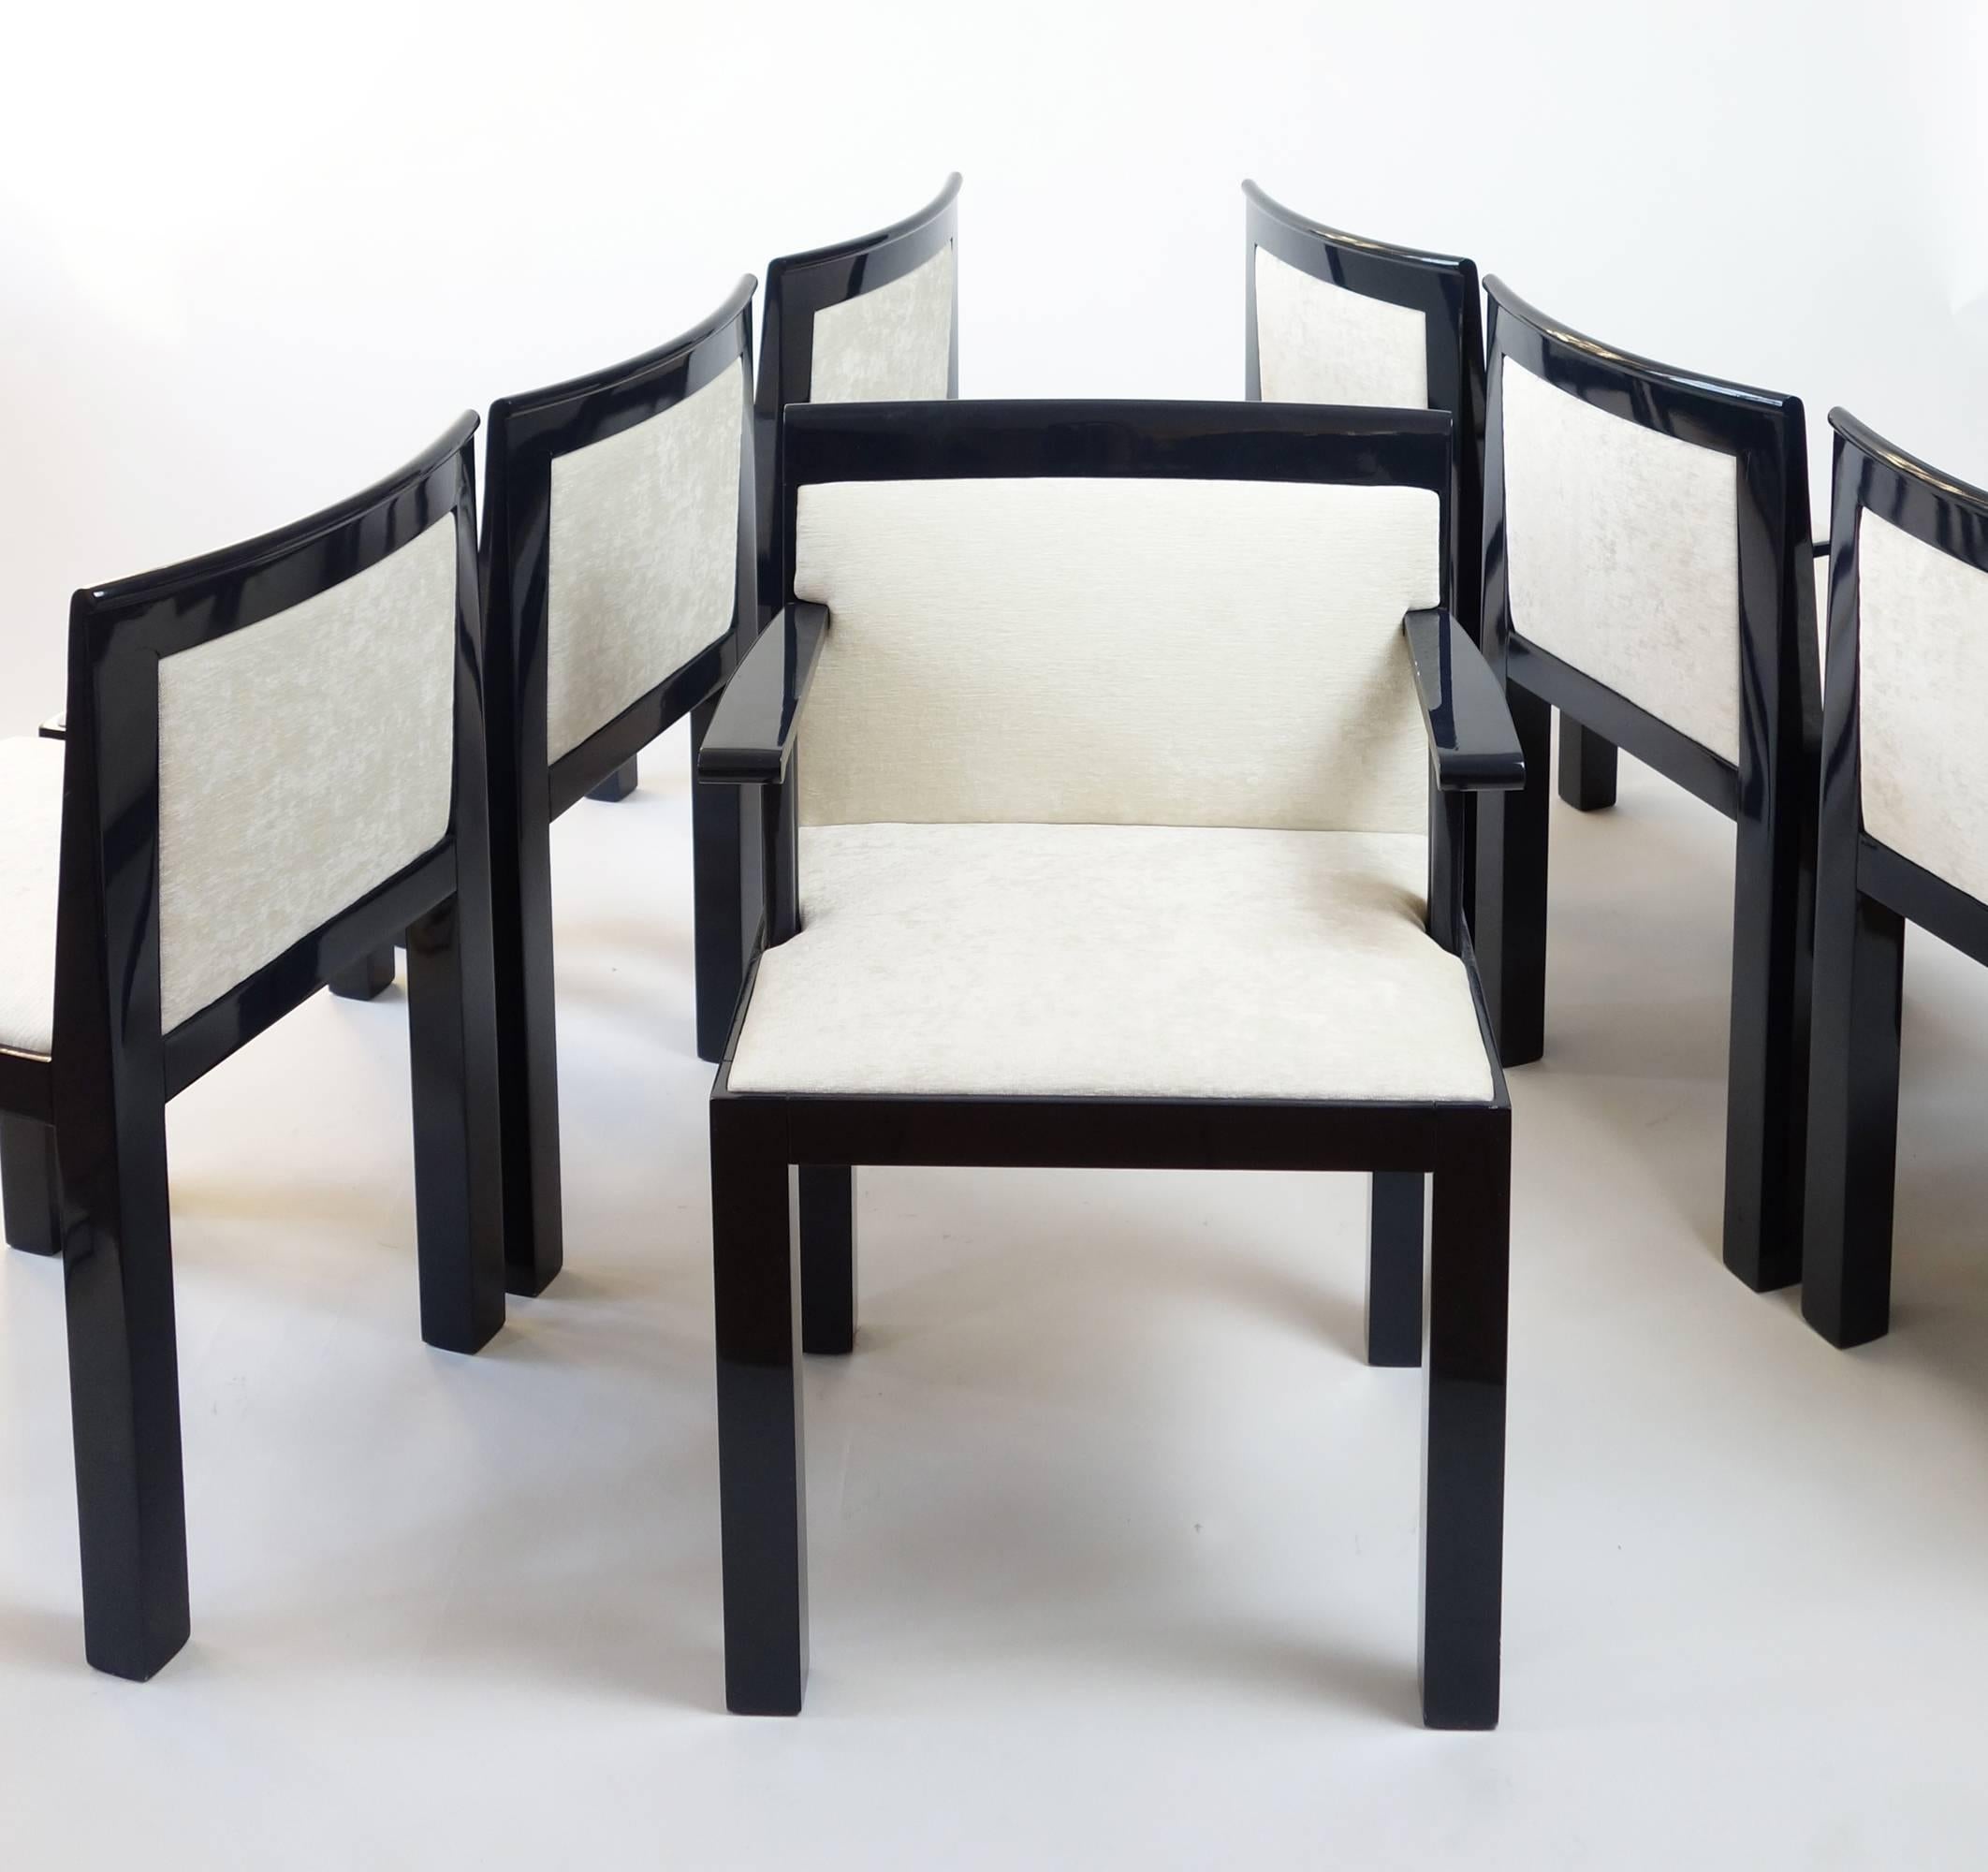 Aldo Rossi was the first Italian to receive the Pritzker Prize for architecture. He was also applauded for his product design. The gorgeous Teatro dining chairs were designed by Rossi and his colleague Luca Media for Molteni in the early 1980s. The